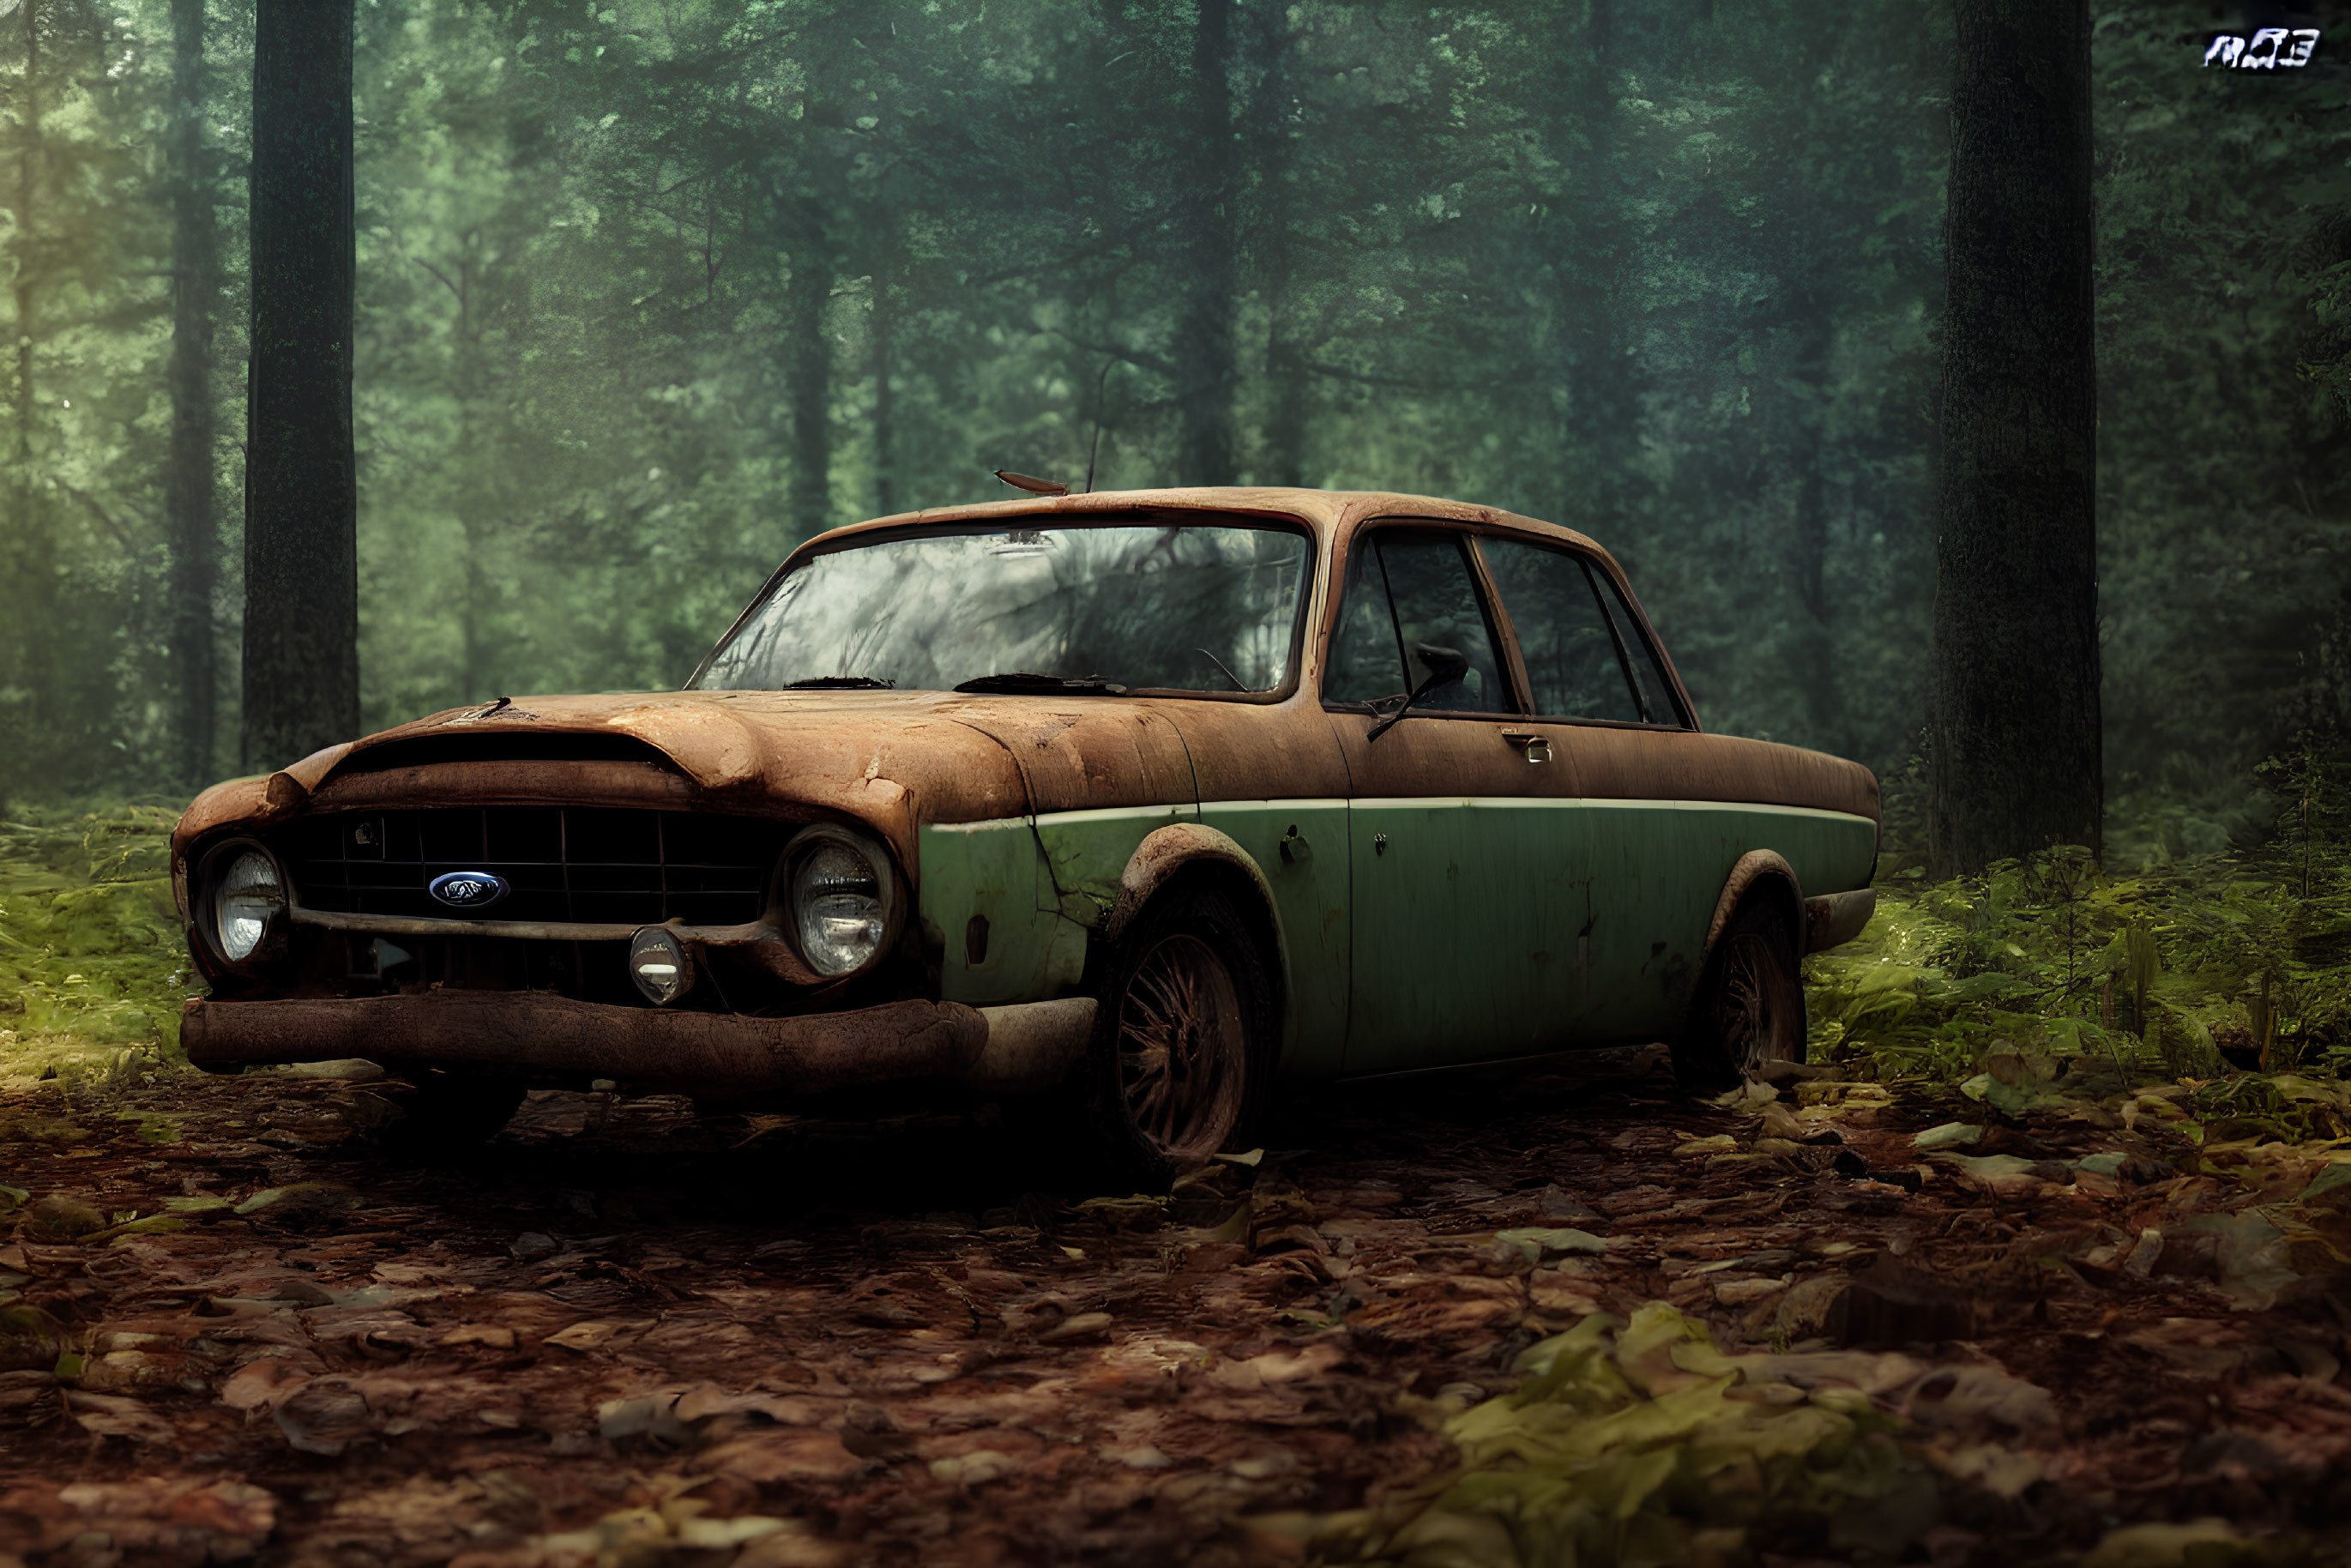 Rusted Ford car in misty forest with foliage - Abandoned and neglected